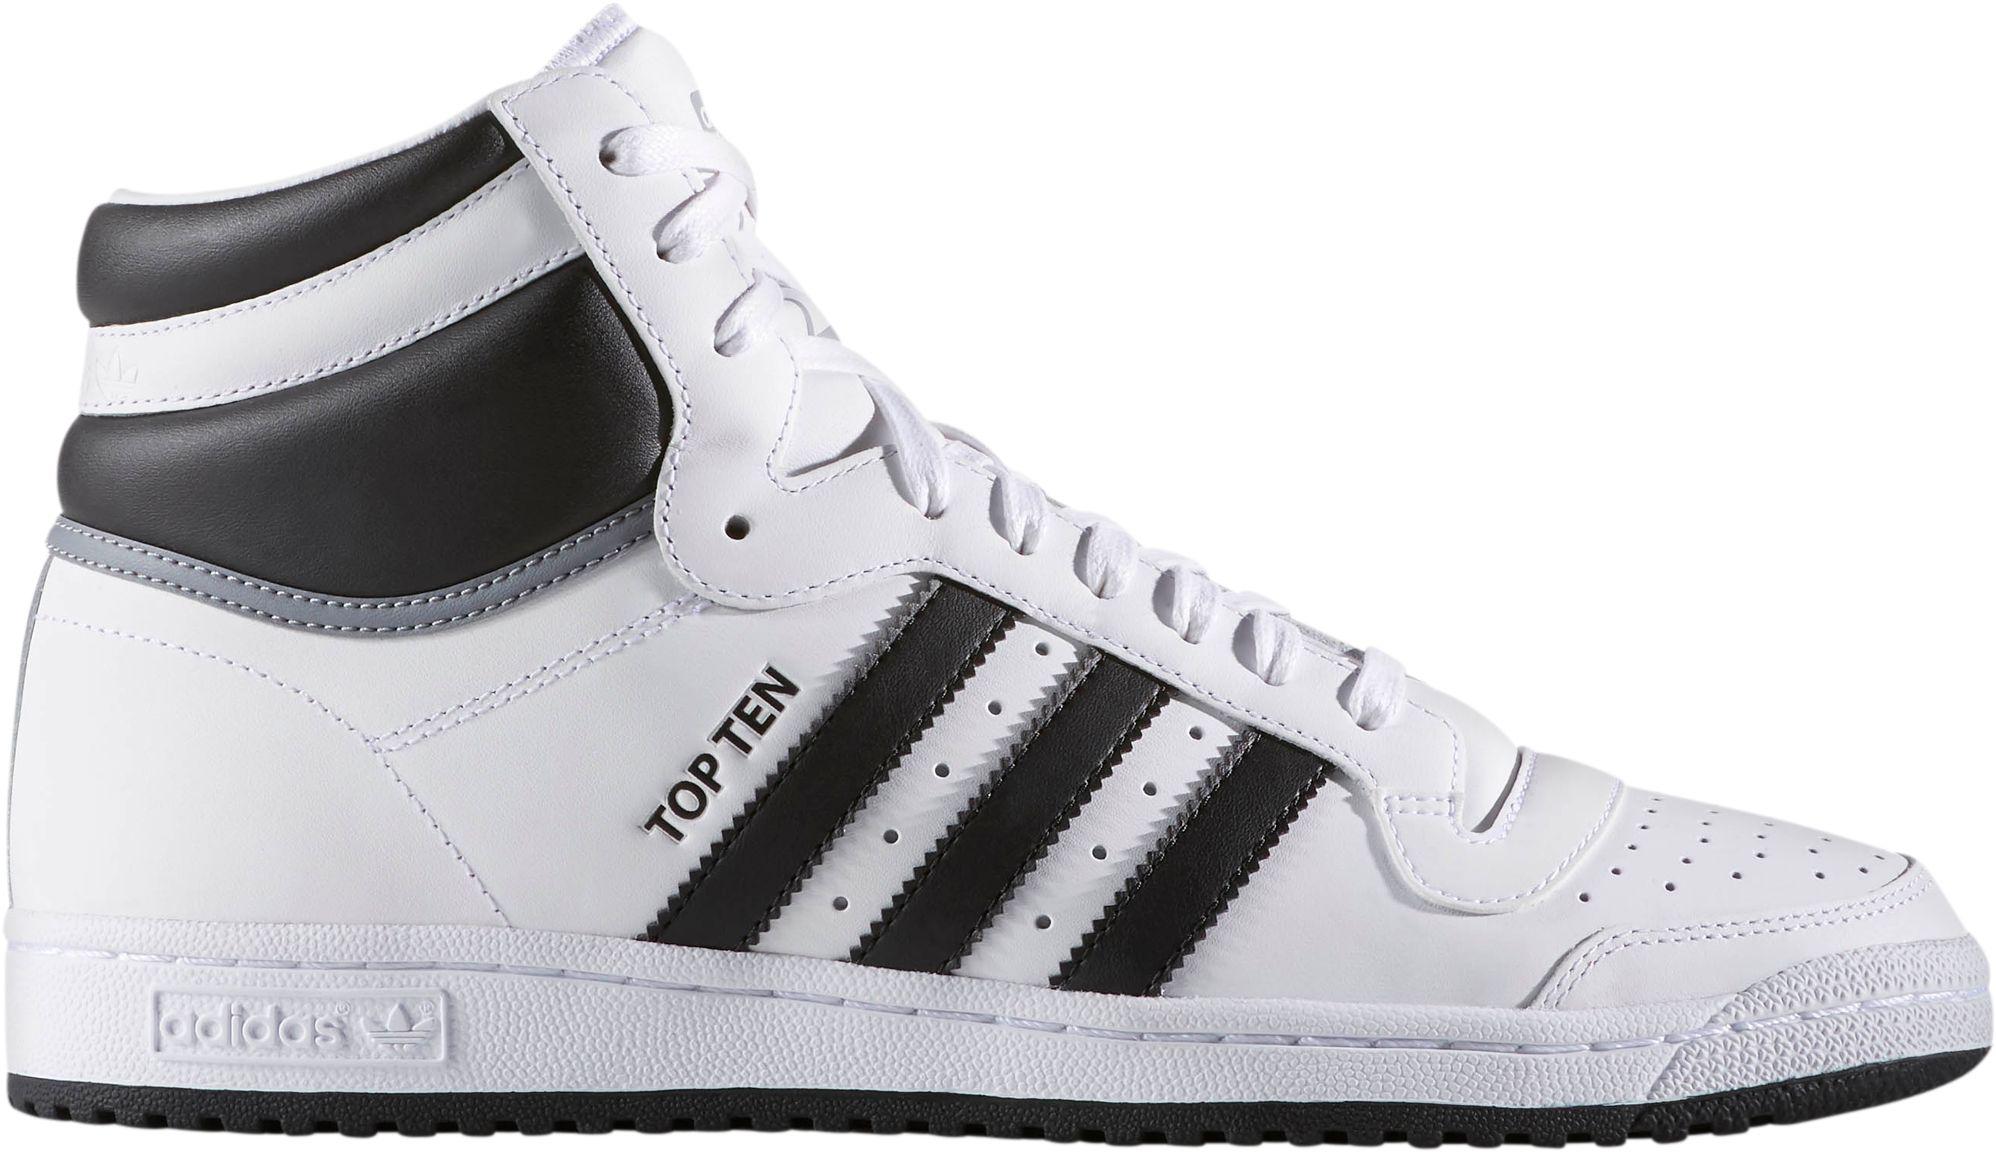 adidas Originals Synthetic Top Ten Hi Shoes in White/Black (White) for ...